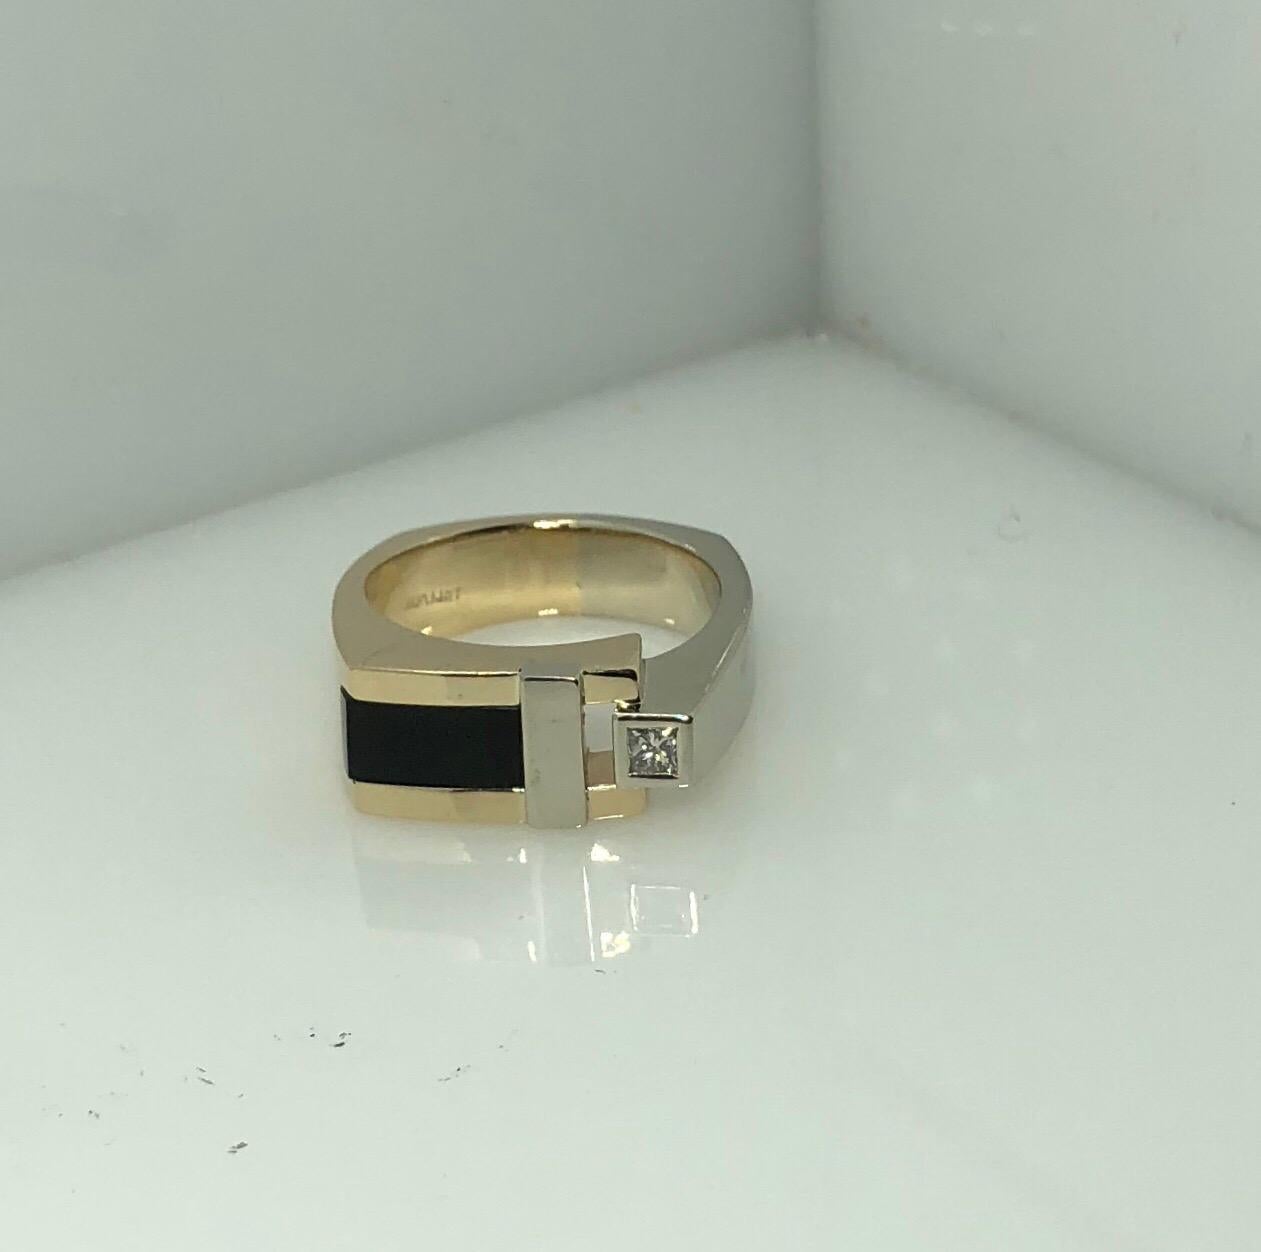 Aurum 14 Karat Two-Tone Diamond and Onyx Contemporary Ring In New Condition For Sale In Mansfield, OH